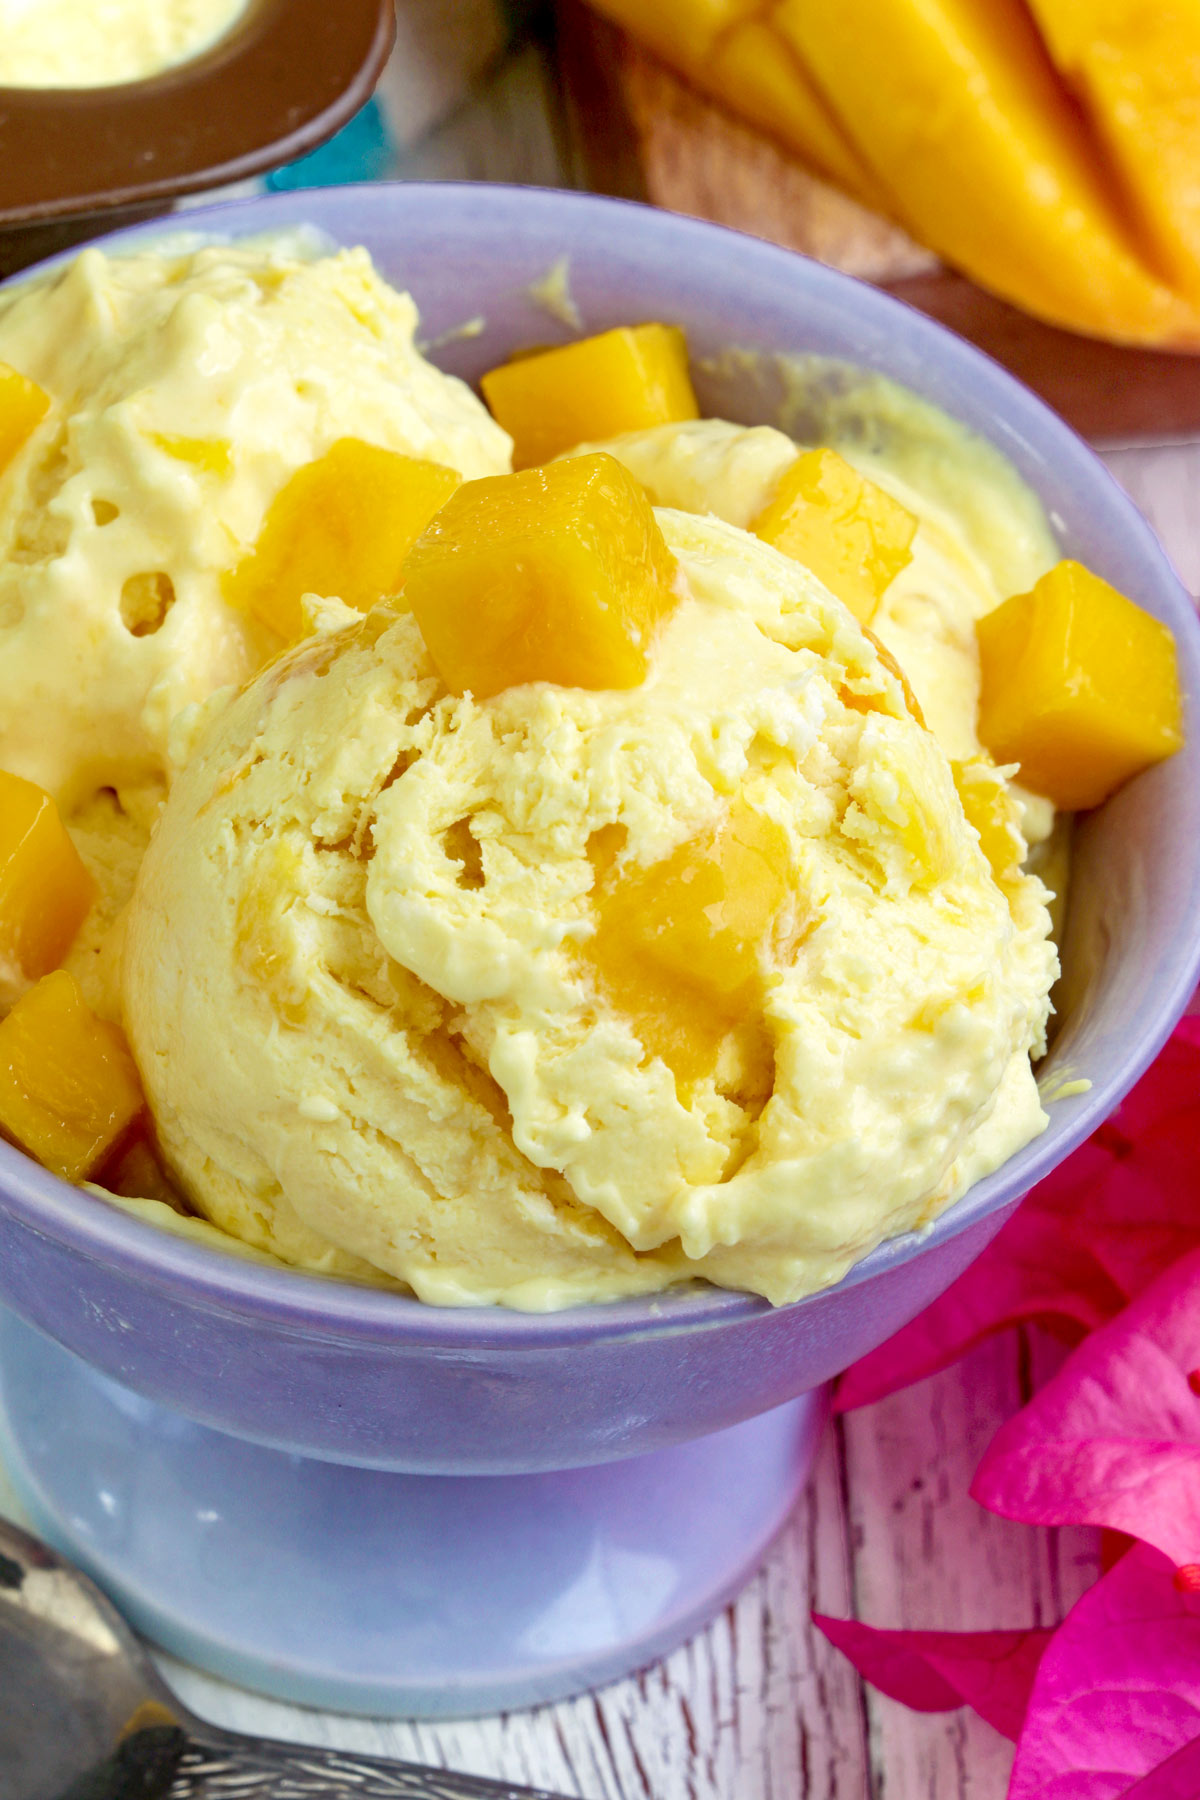 Creamy and smooth Mango Ice Cream served on a bowl with mango bits.